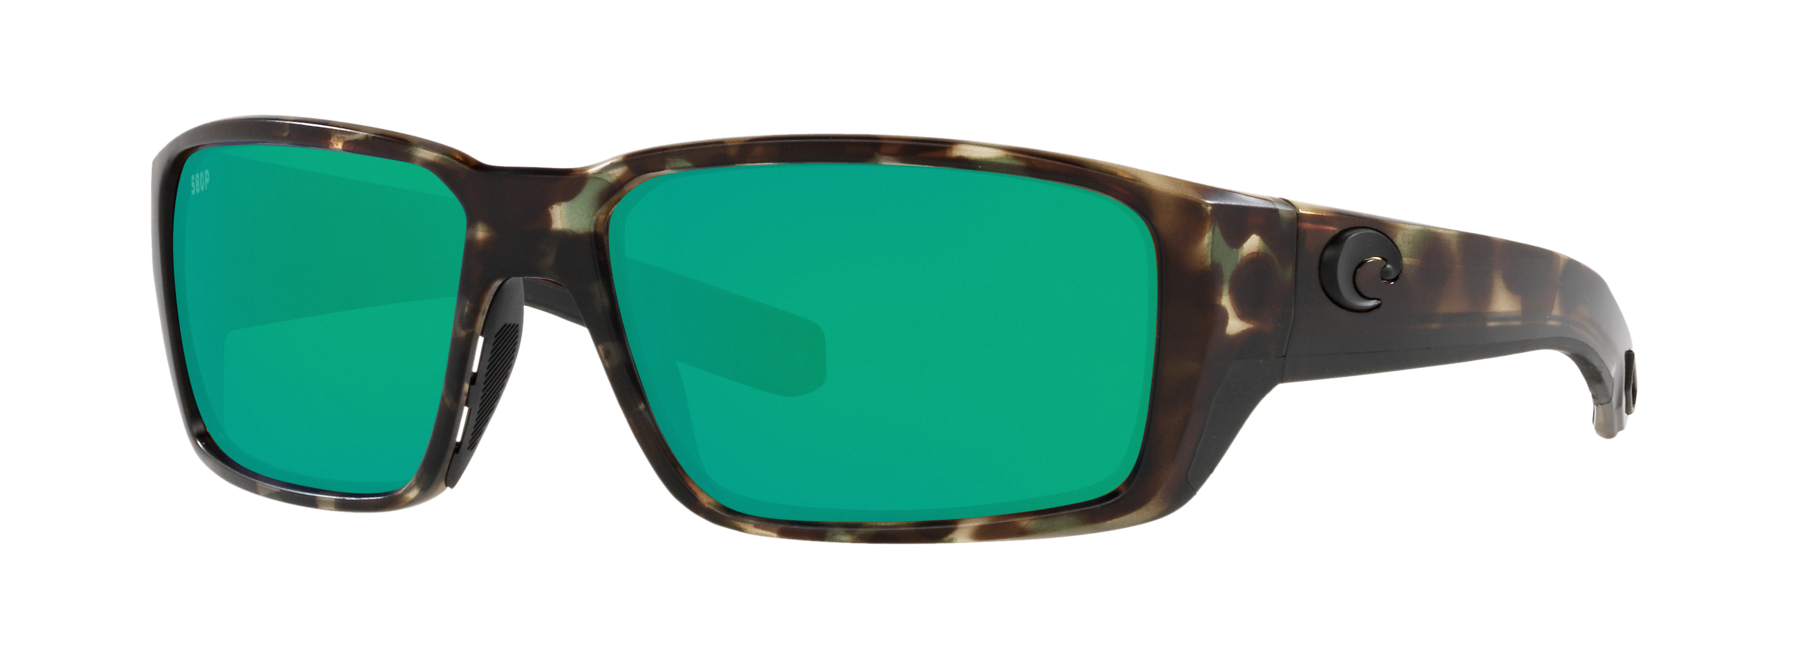 costa fantail pro sunglasses with green mirror lenses